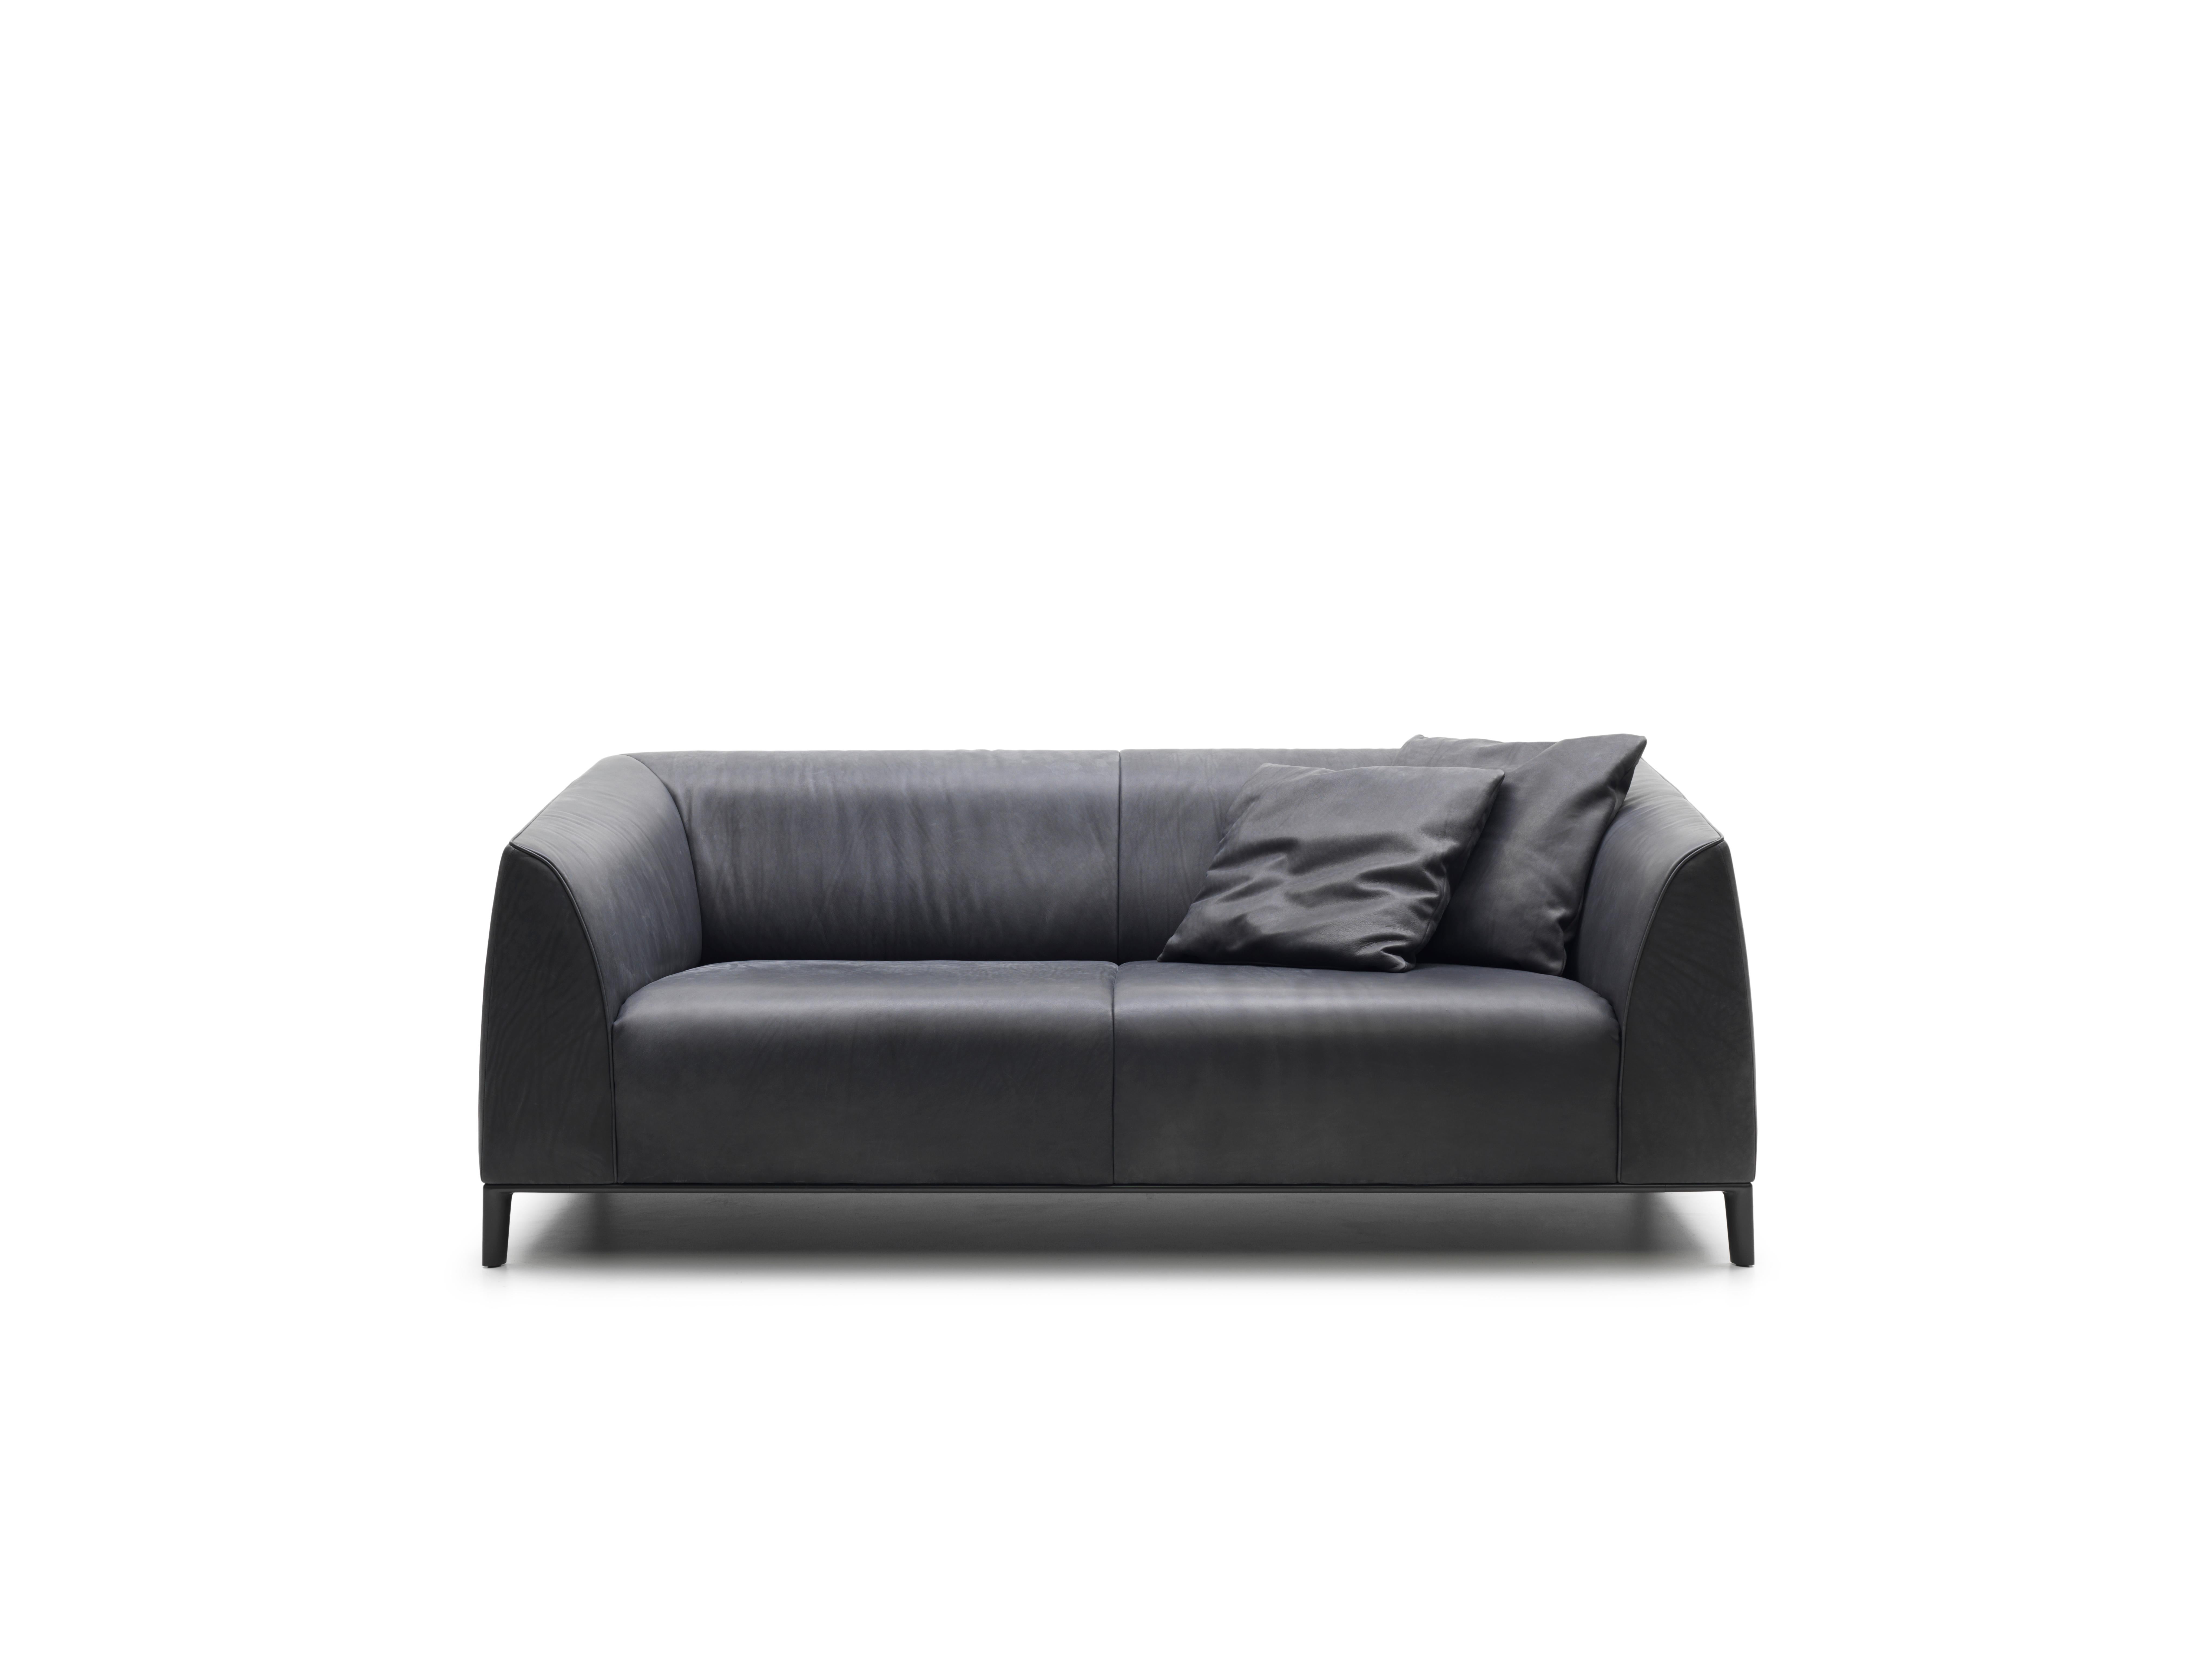 Set of DS-276 Sofa and Cushions by De Sede
Design: Christian Werner
Dimensions: 
Sofa: D 63 x W 190 x H 72 cm
Cushions: D 12 x W 45 x 45 cm
Materials: aluminium, leather

Prices may change according to the chosen materials and size. 

The